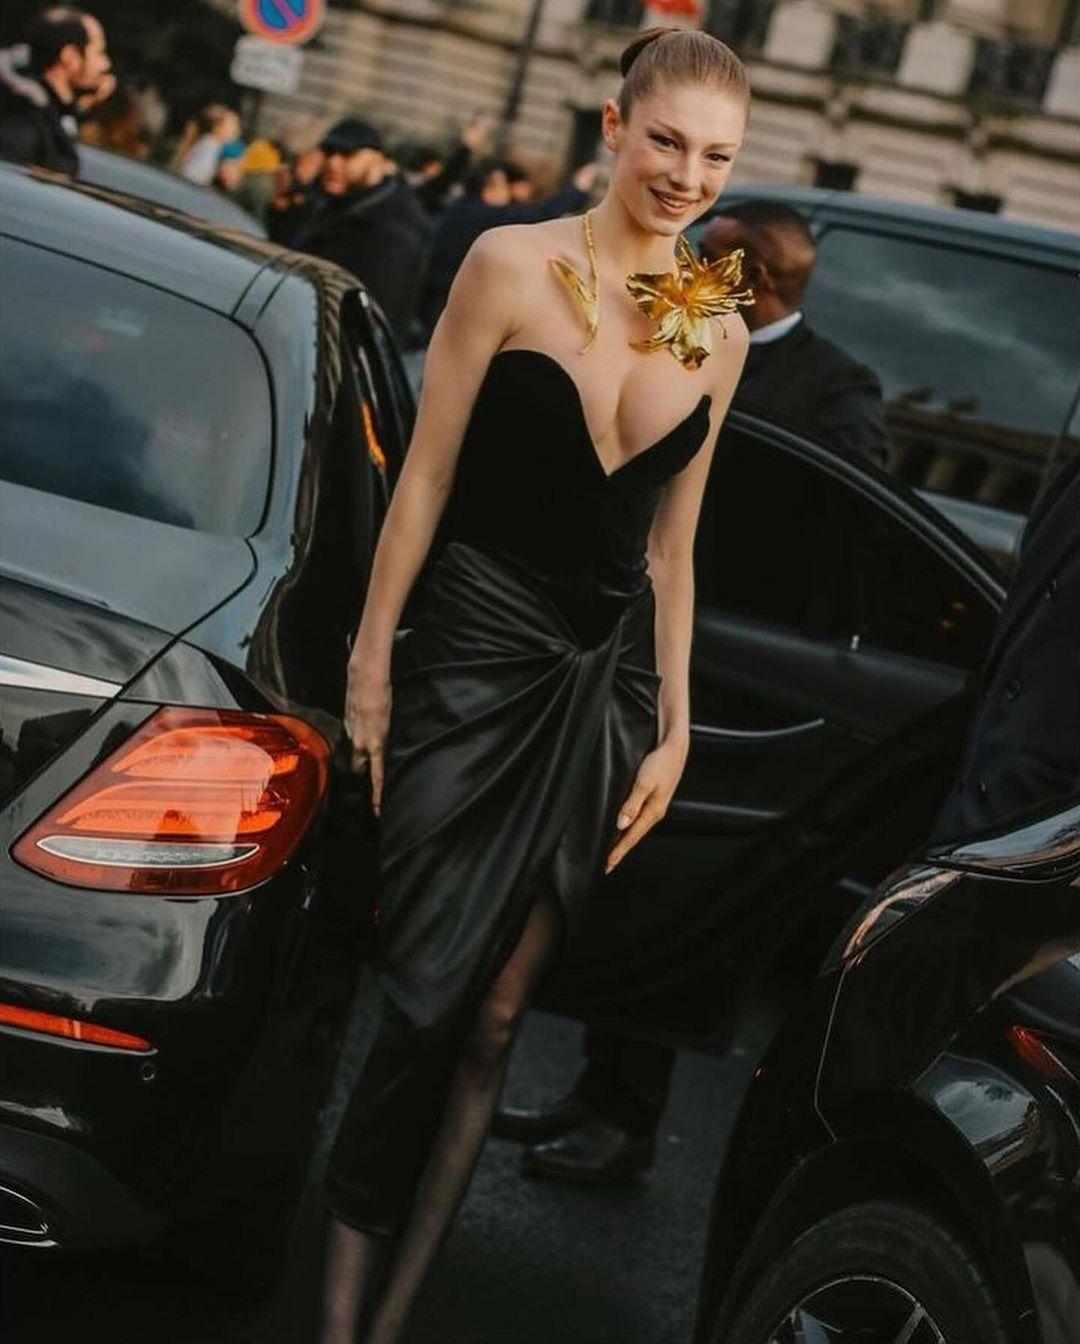 Hunter Schafer wore a black strapless velvet midi dress that had a gathered waist, a side slit, and a flowy satin finish – typical Schiaparelli elegance. Staying true to their signature style, a touch of gold was added to the dress. The strapless neckline, featuring a deep v-neck, served as the ideal backdrop for the open-front golden floral necklace.